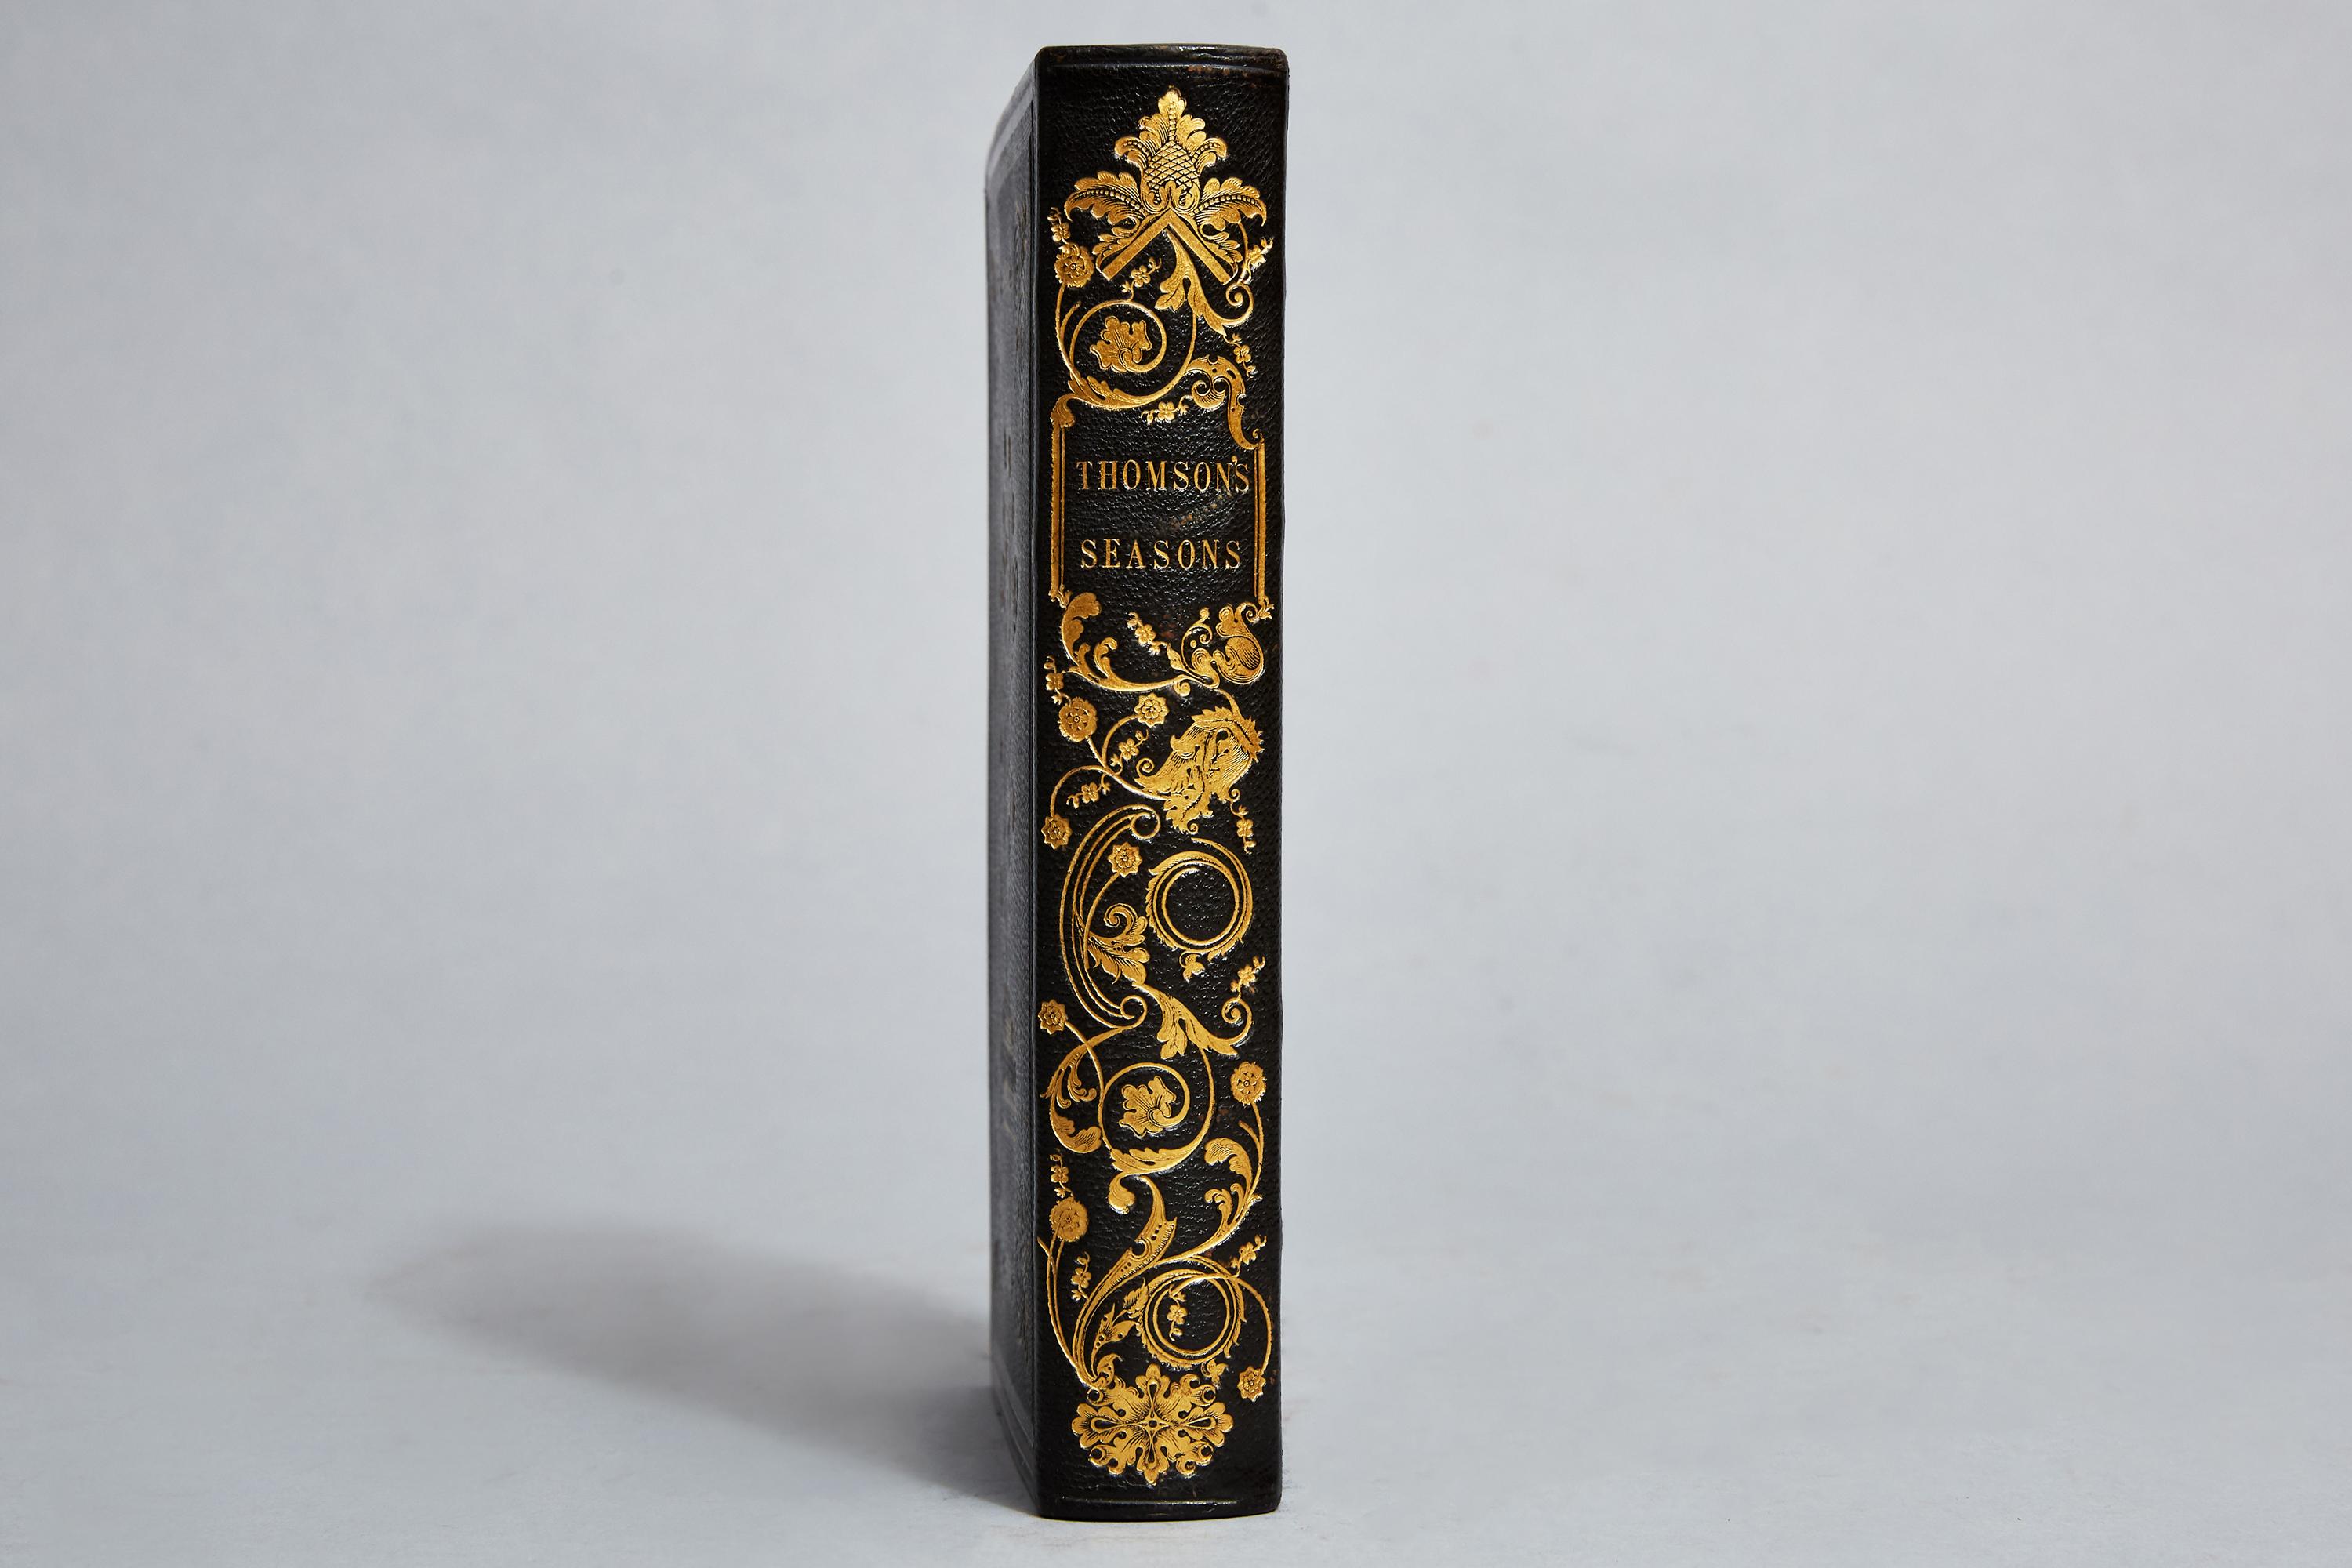 1 volume. James Thomson. 

With 48 illustrations drawn and engraved by Samuel Williams. 

Exquisitely bound in full Brown Morocco with ornate gilt floral tooling on spine and covers, all edges gilt. 8vo. 

Published: London: Tilt & Bogue 1841.